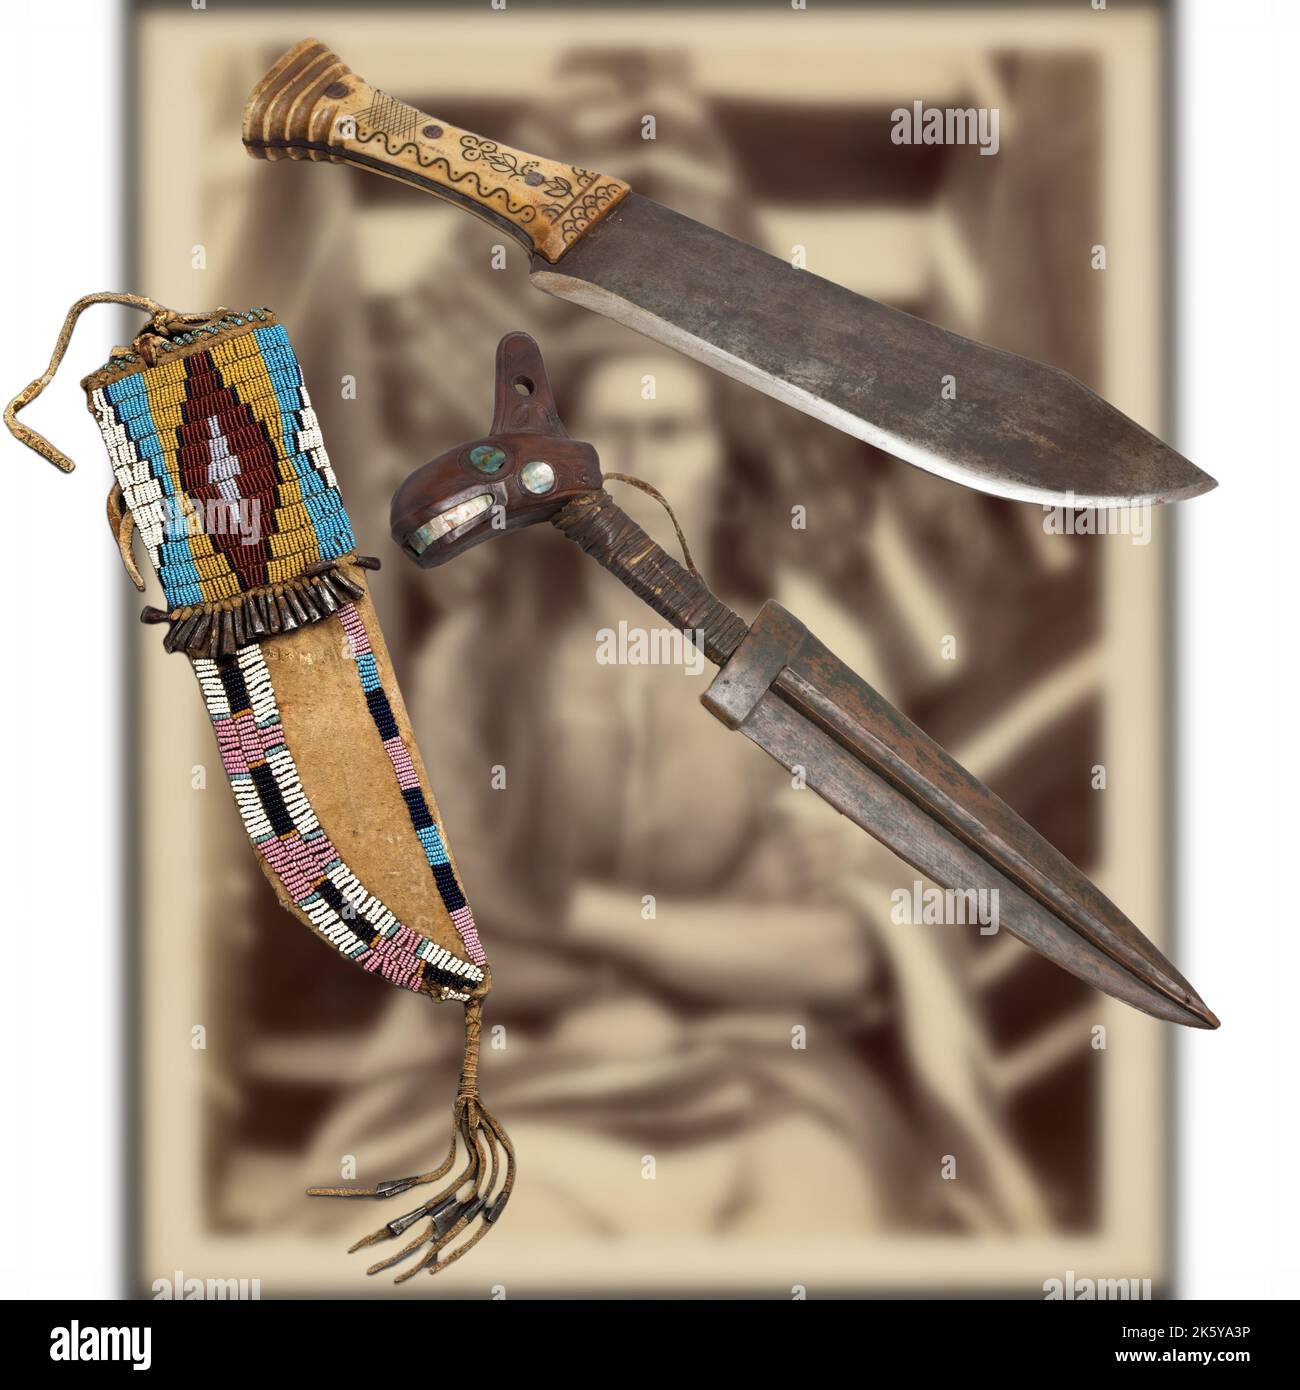 Native American culture Art - a collection of Knives Stock Photo